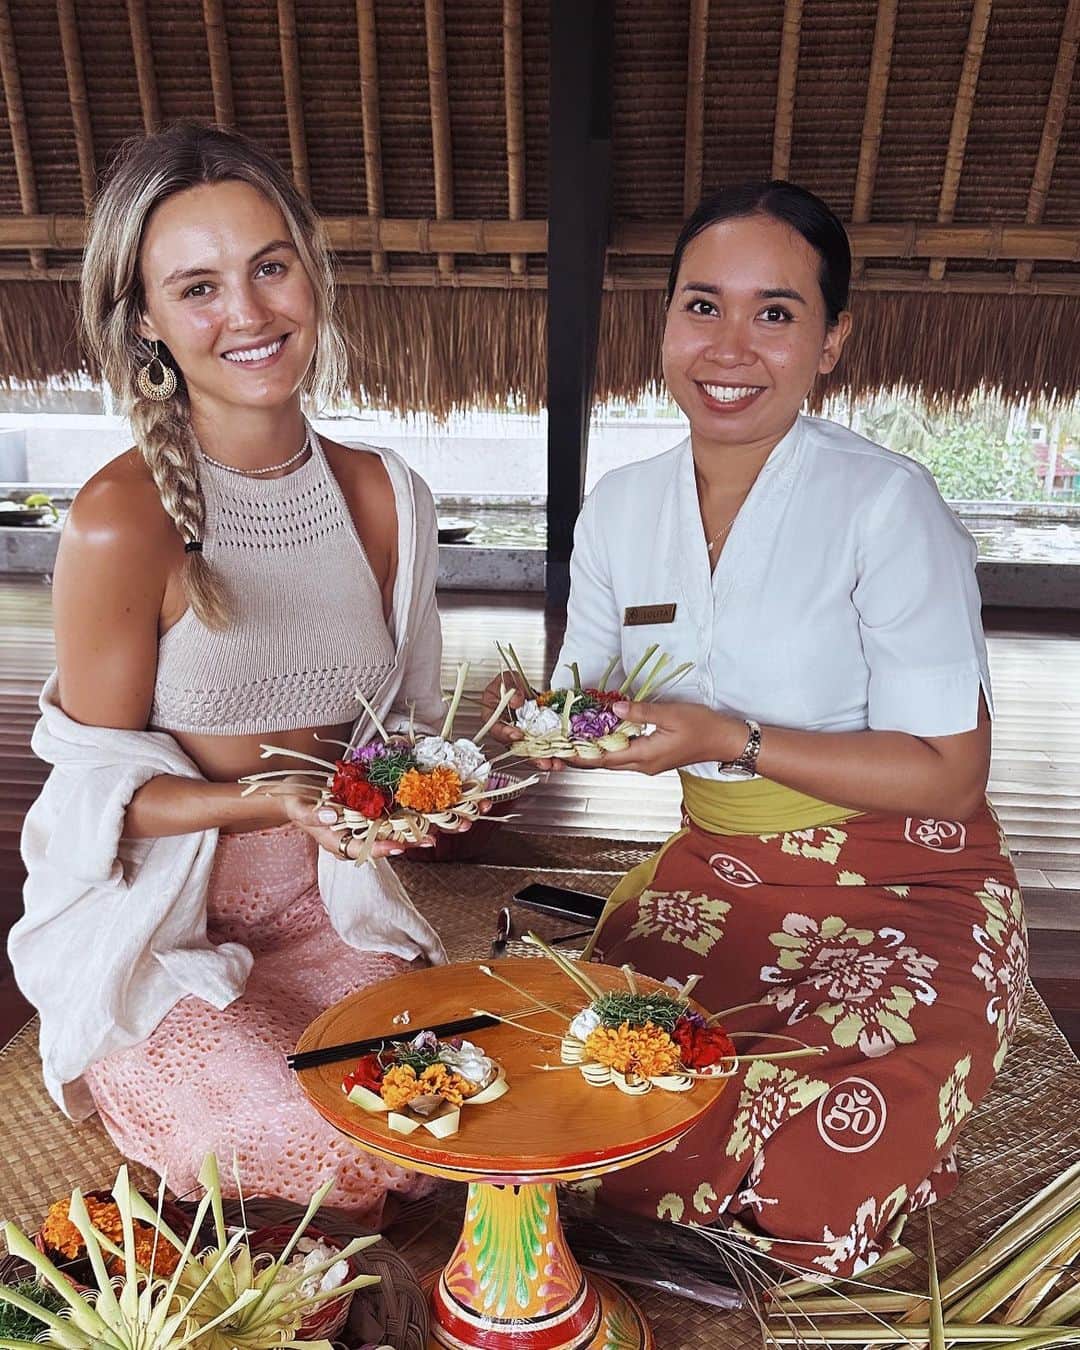 ニオミ・スマートのインスタグラム：「Terima kasih Lolita for teaching me how to make the beautiful traditional canang sari - these are the offerings that we see everywhere in Bali. They’re handmade woven baskets made from palm leaves and decorated with colourful petals and incense to pass on as an offering to the land and the gods.   What a creative way of praying & spreading love, expressing gratitude, and creating beauty on a daily basis. Within one household approximately 50 canang sari are offered in one day! I can’t think of an equivalent daily practice of offering back to the land that we do back home.   I’ve taken inspiration from this symbol of gratitude, and everywhere I’ve been during the past year I’ve created a small altar in the home with items of personal significance to me. This keeps me grounded in new environments. I’ve started offering natural items I find such as flowers or shells to the altar, creating more purpose and a connection to nature 🙏🌟🌿.   For me, this is a moment during my day to pause and consider what I’m thankful for in my life, for the guidance, the protection, and the support I feel around me. It is unrealistic to make and offer 50 canang sari a day especially when back home in the West, but taking inspiration from this and finding a personal unique daily ritual to take a moment to express gratitude I think is a beautiful thing.  If you’re considering building your own gratitude altar at home, I recommend gathering some of your most precious personal items such as sentimental ornaments, crystals, jewellery, and decorating a small table. Make it fun and get creative! I found this handwoven throw in Sumba (see last image) that I’ve used to cover the table, and decorated with petals and shells found in Bali. I’ve placed my incense, sage, and palo santo here for cleansing, and added my favourite oracle cards and crystals. I also occasionally add photos and other items that are special to me - it’s constantly evolving and growing!  If you feel called to create your own, have fun with it and know there is no right or wrong. It’s your own unique creation and practice.   🙏🌟」